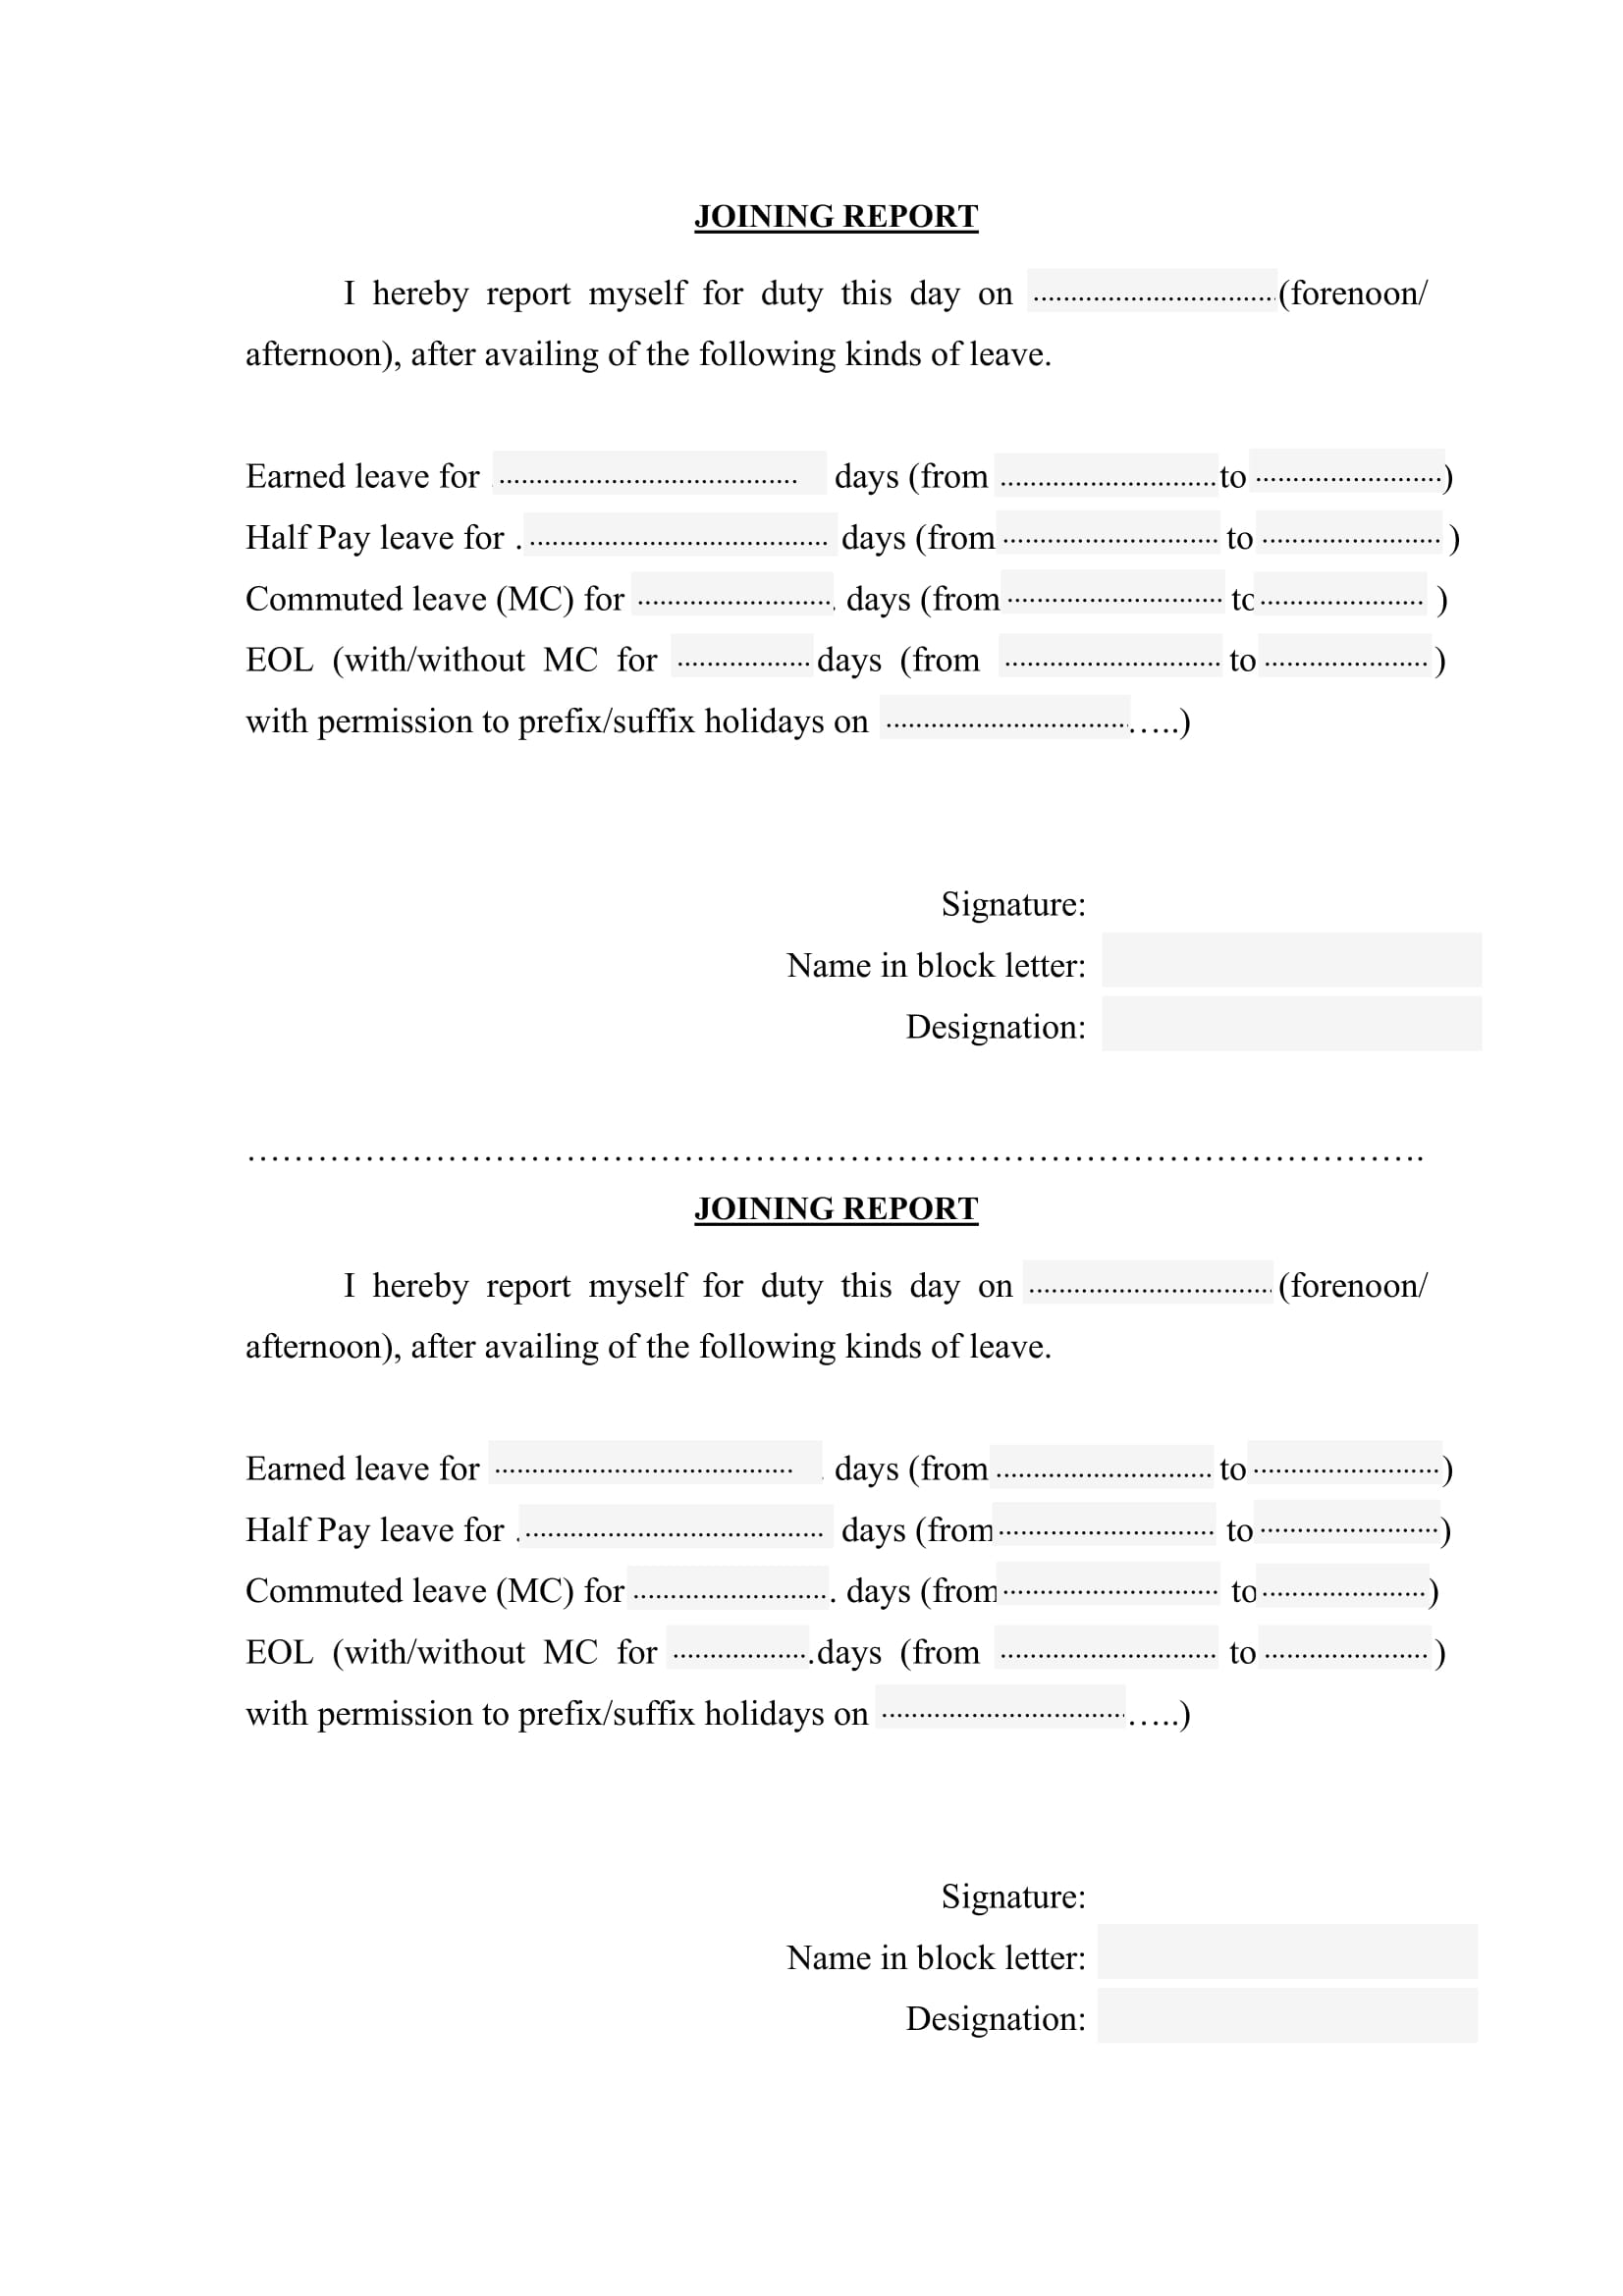 sample fillable joining report form 1